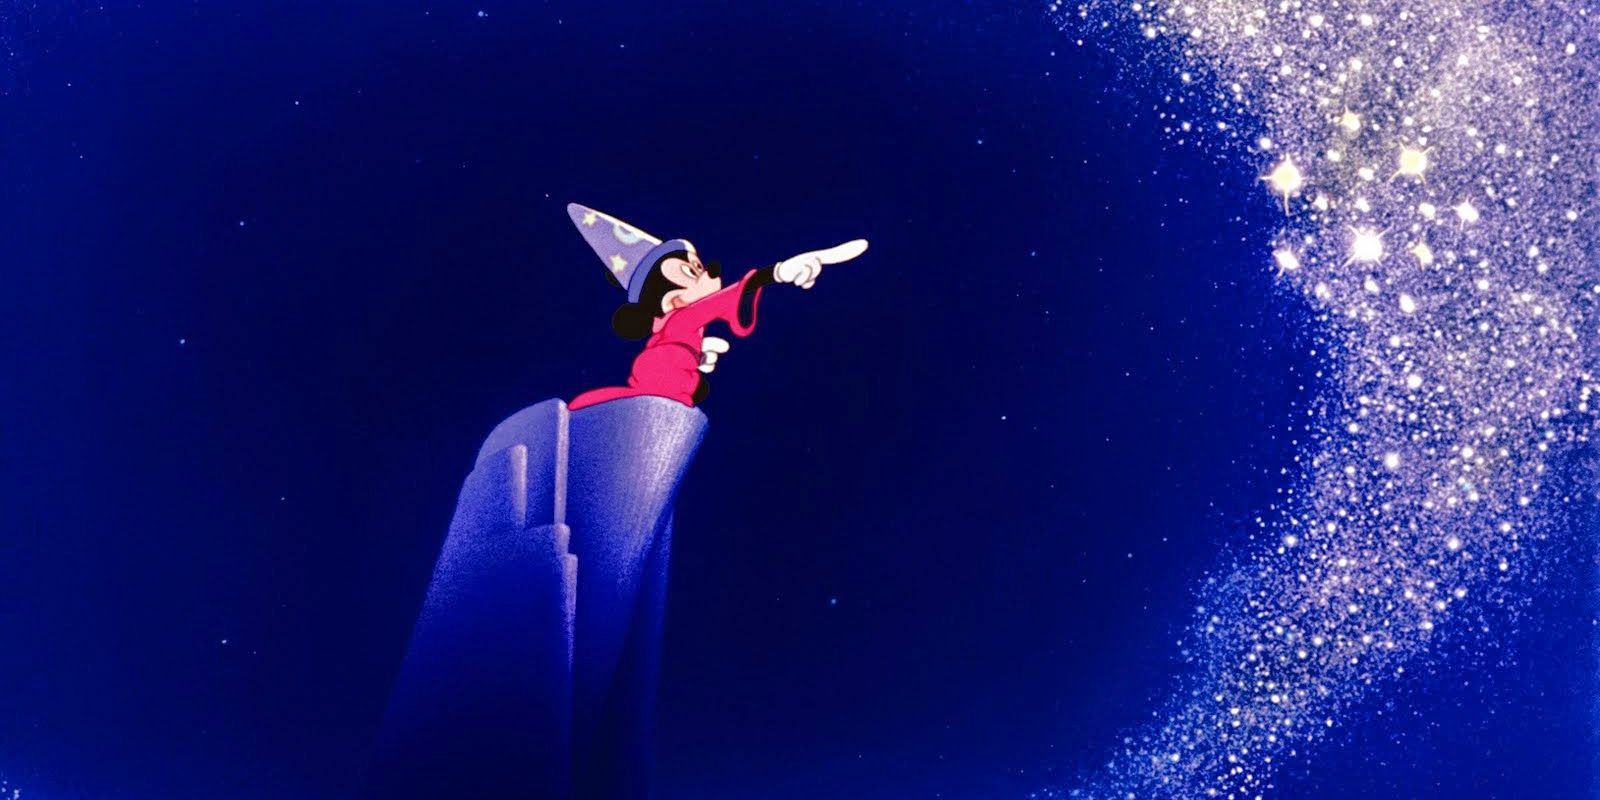 Wizard Mickey casts a spell in Fantasia